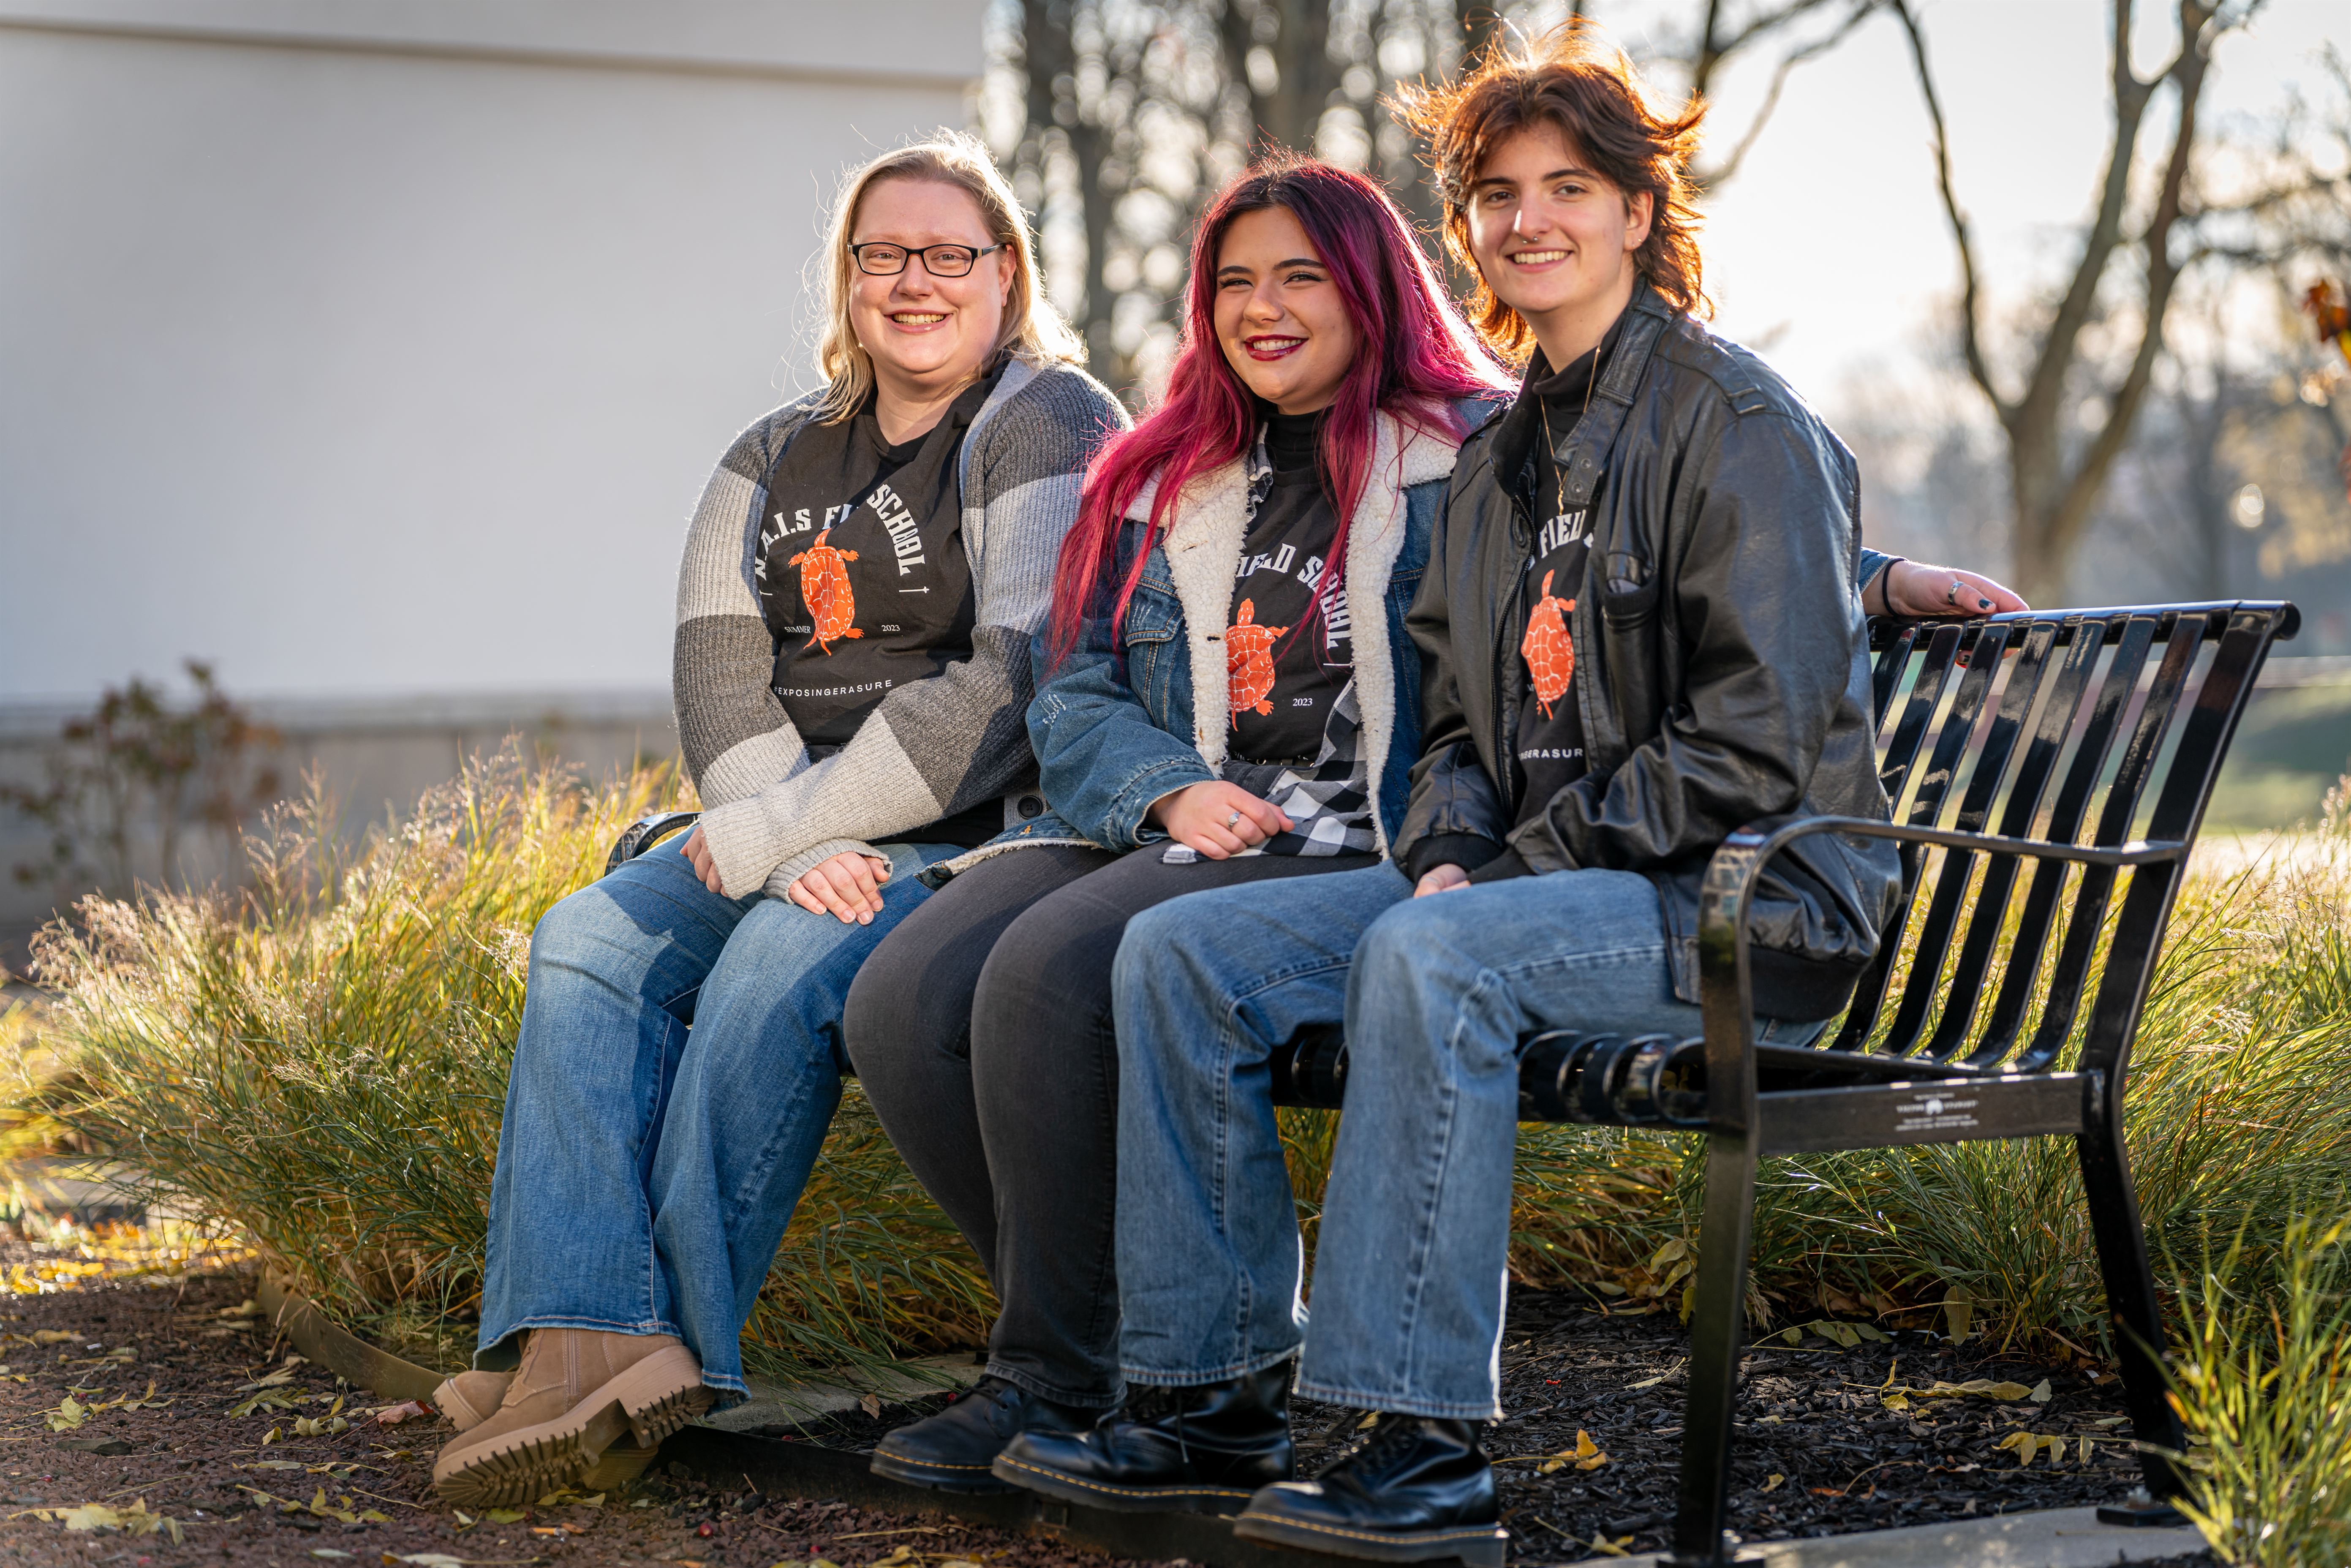 The Native American and Indigenous Studies club (NAIS) was started to involve students outside the NAIS major who were interested in Indigenous studies.
Karsten Englander | The Montclarion